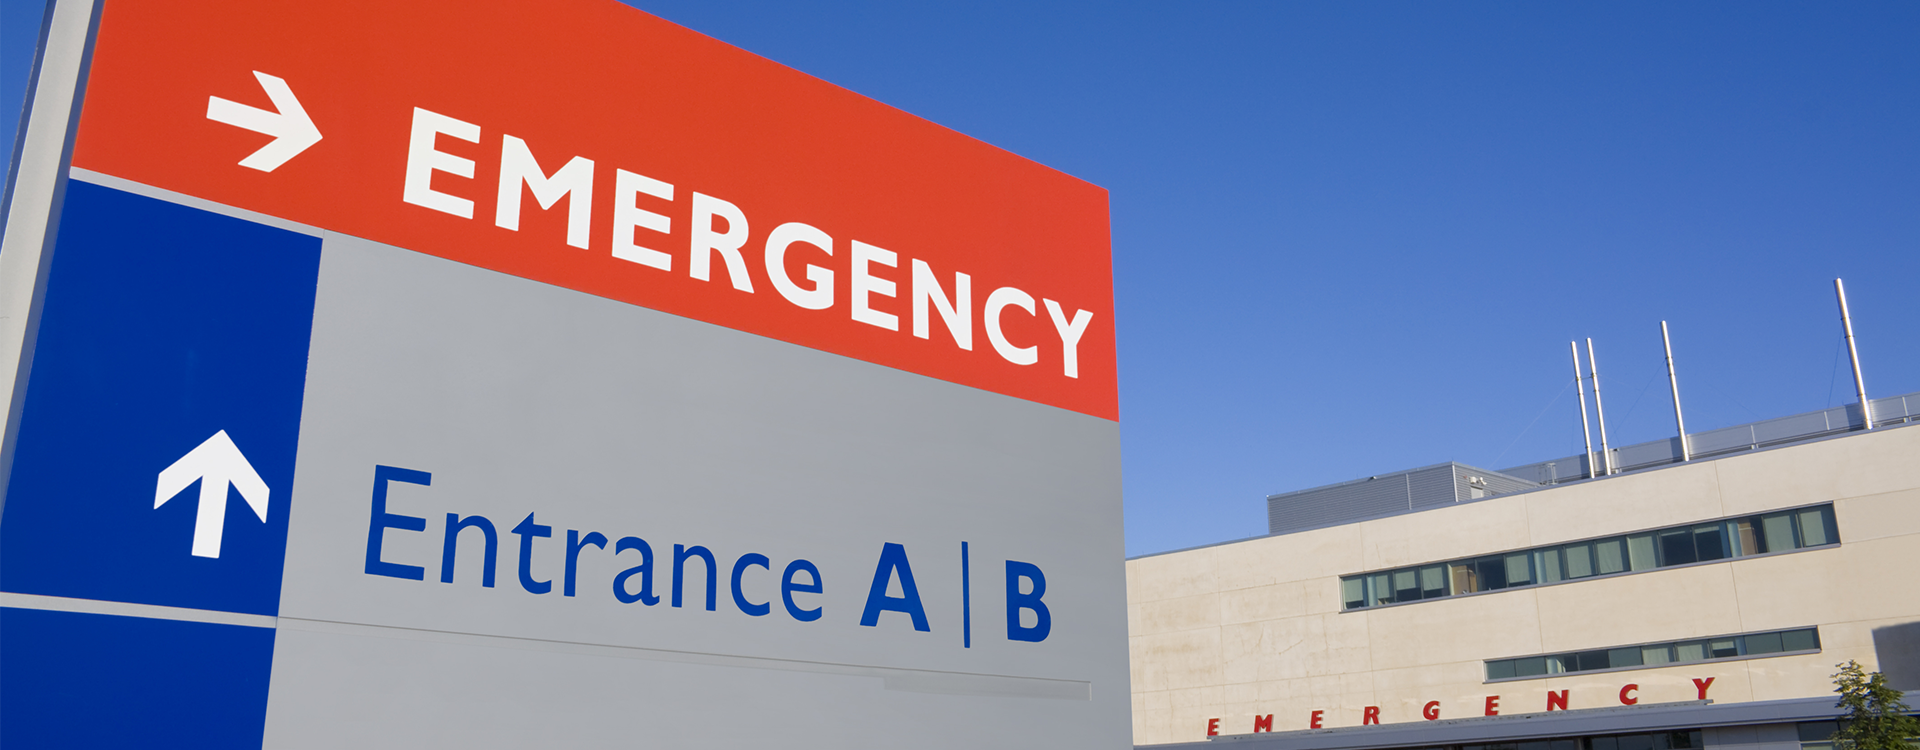 Common Questions About COVID-19 and the Emergency Room